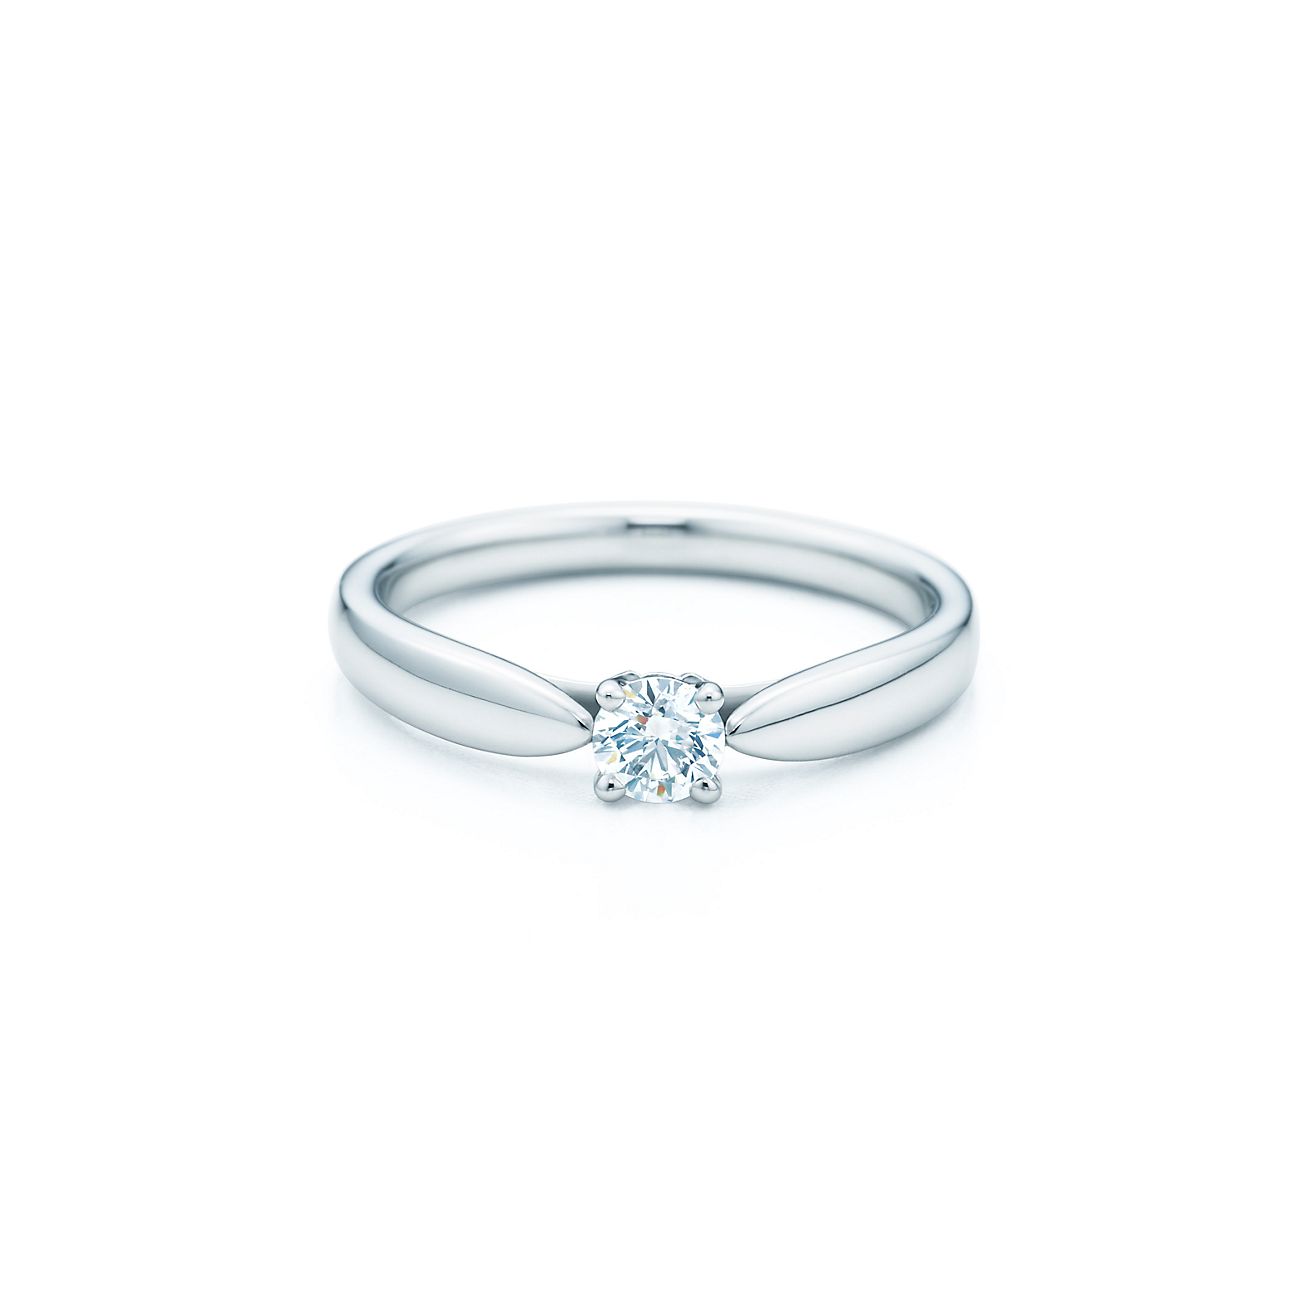 Tiffany Harmony® ring in platinum with 